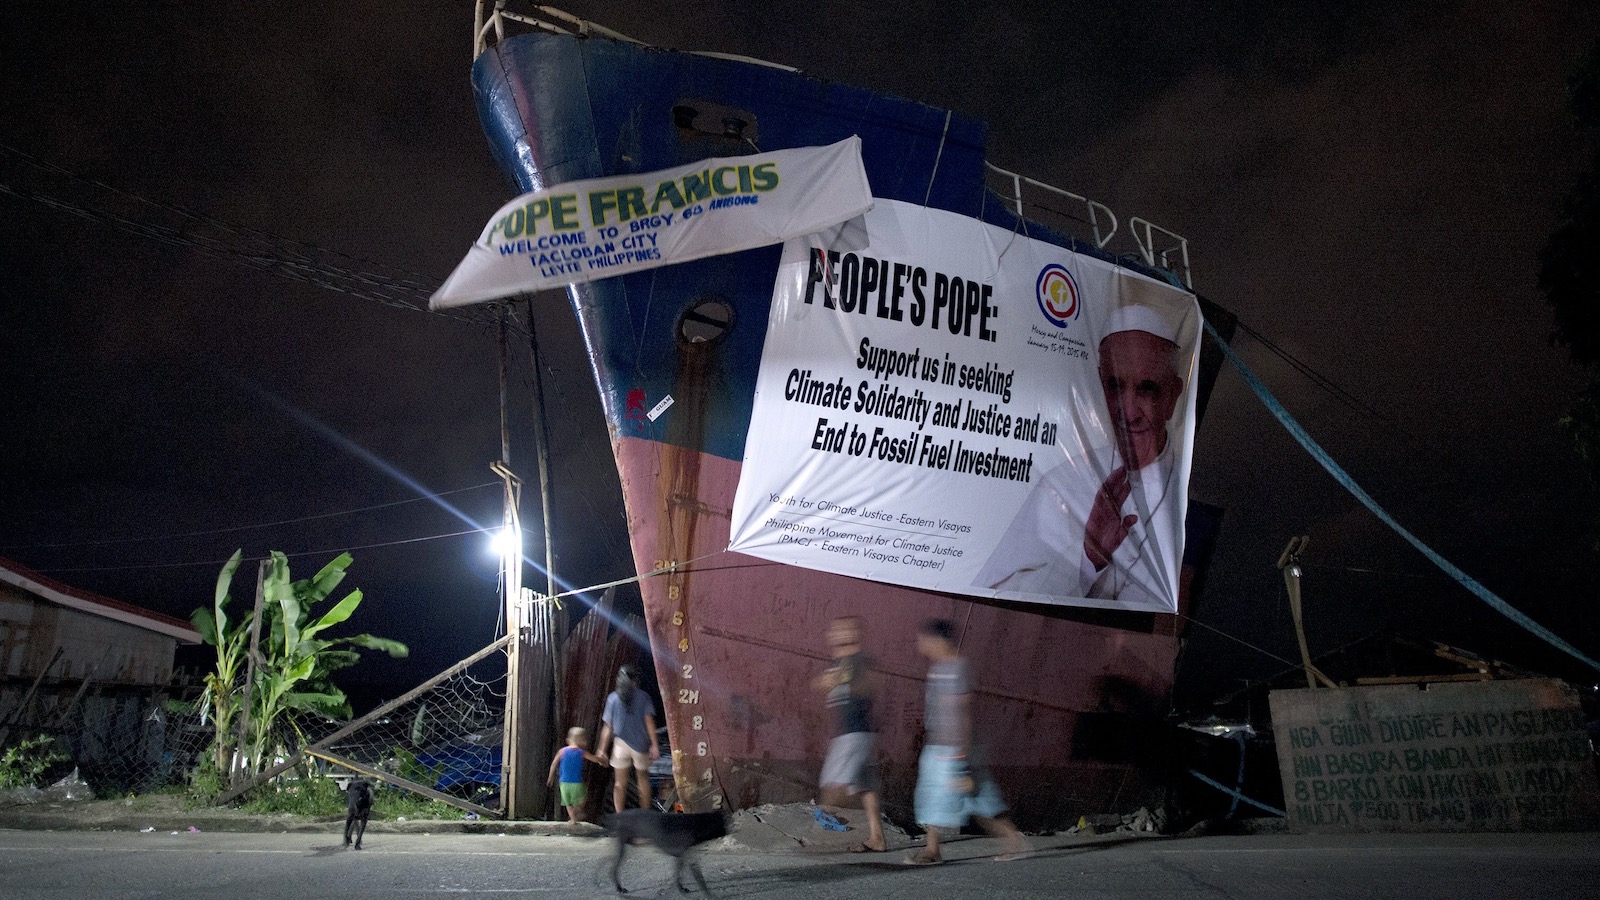 Residents of Tacloban in the Philippines walk past the bow of a broken ship that has washed ashore. The vessel bears a banner reading "People's pope: Support us in seeking climate solidarity and an end to fossil fuel investment."